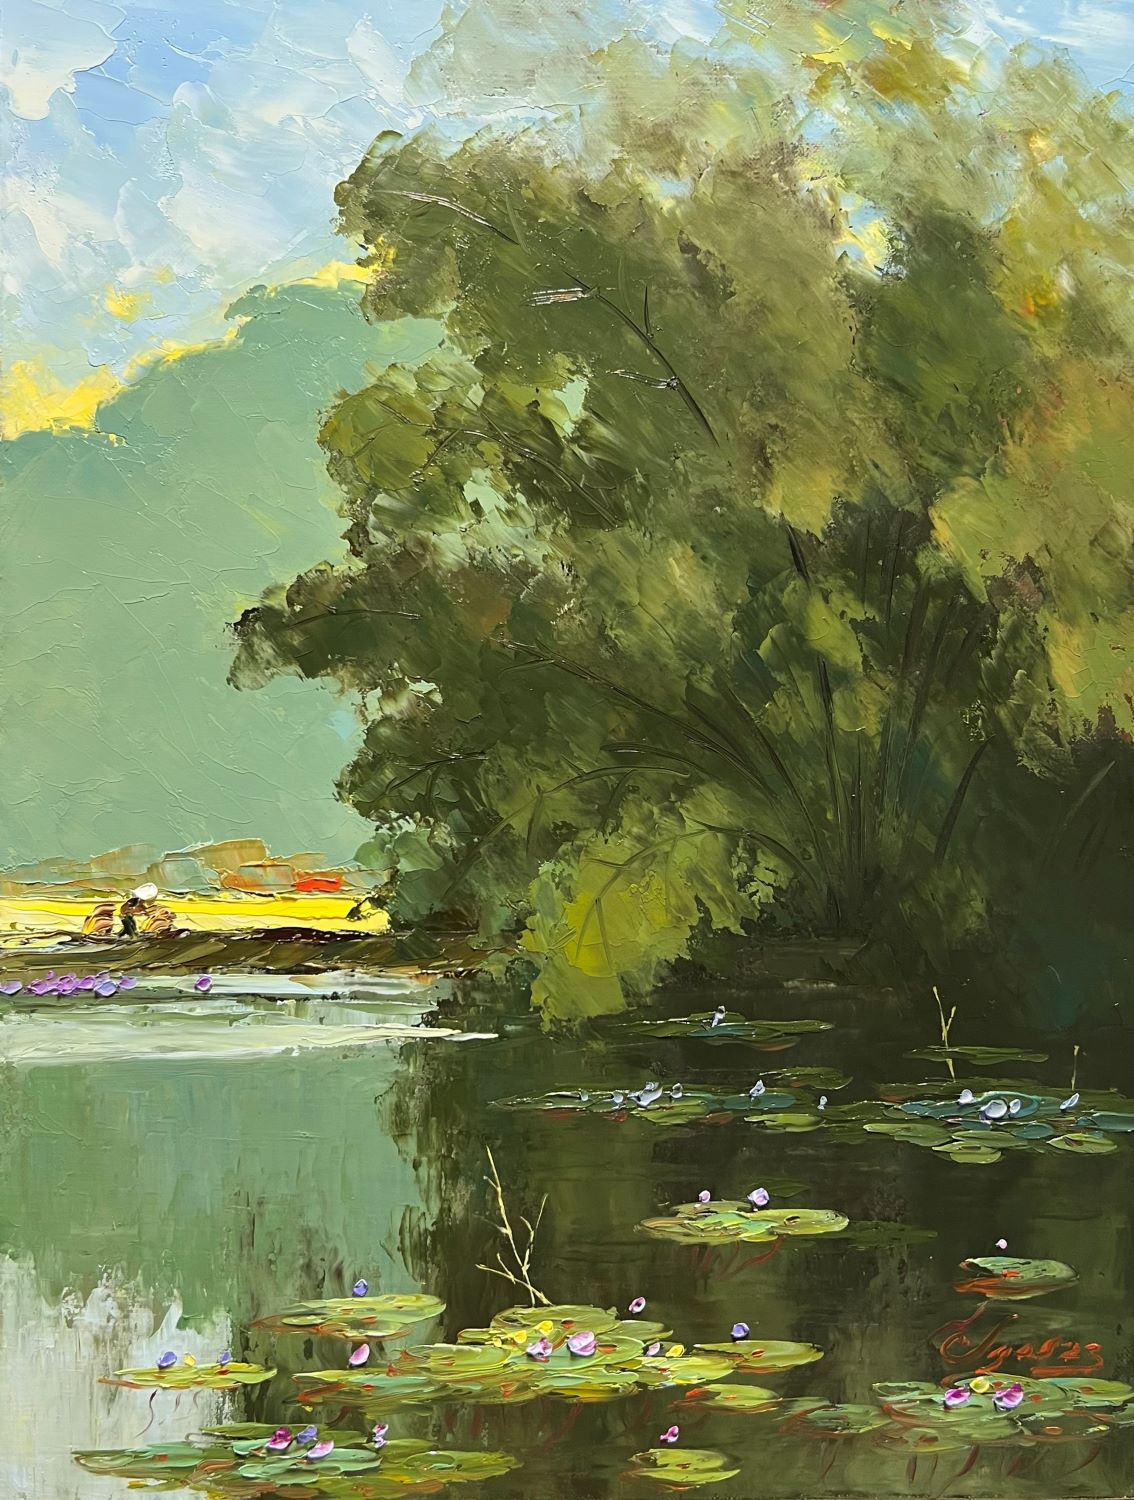 Pond in Autumn VII - Vietnamese Oil Painting by Artist Dang Dinh Ngo